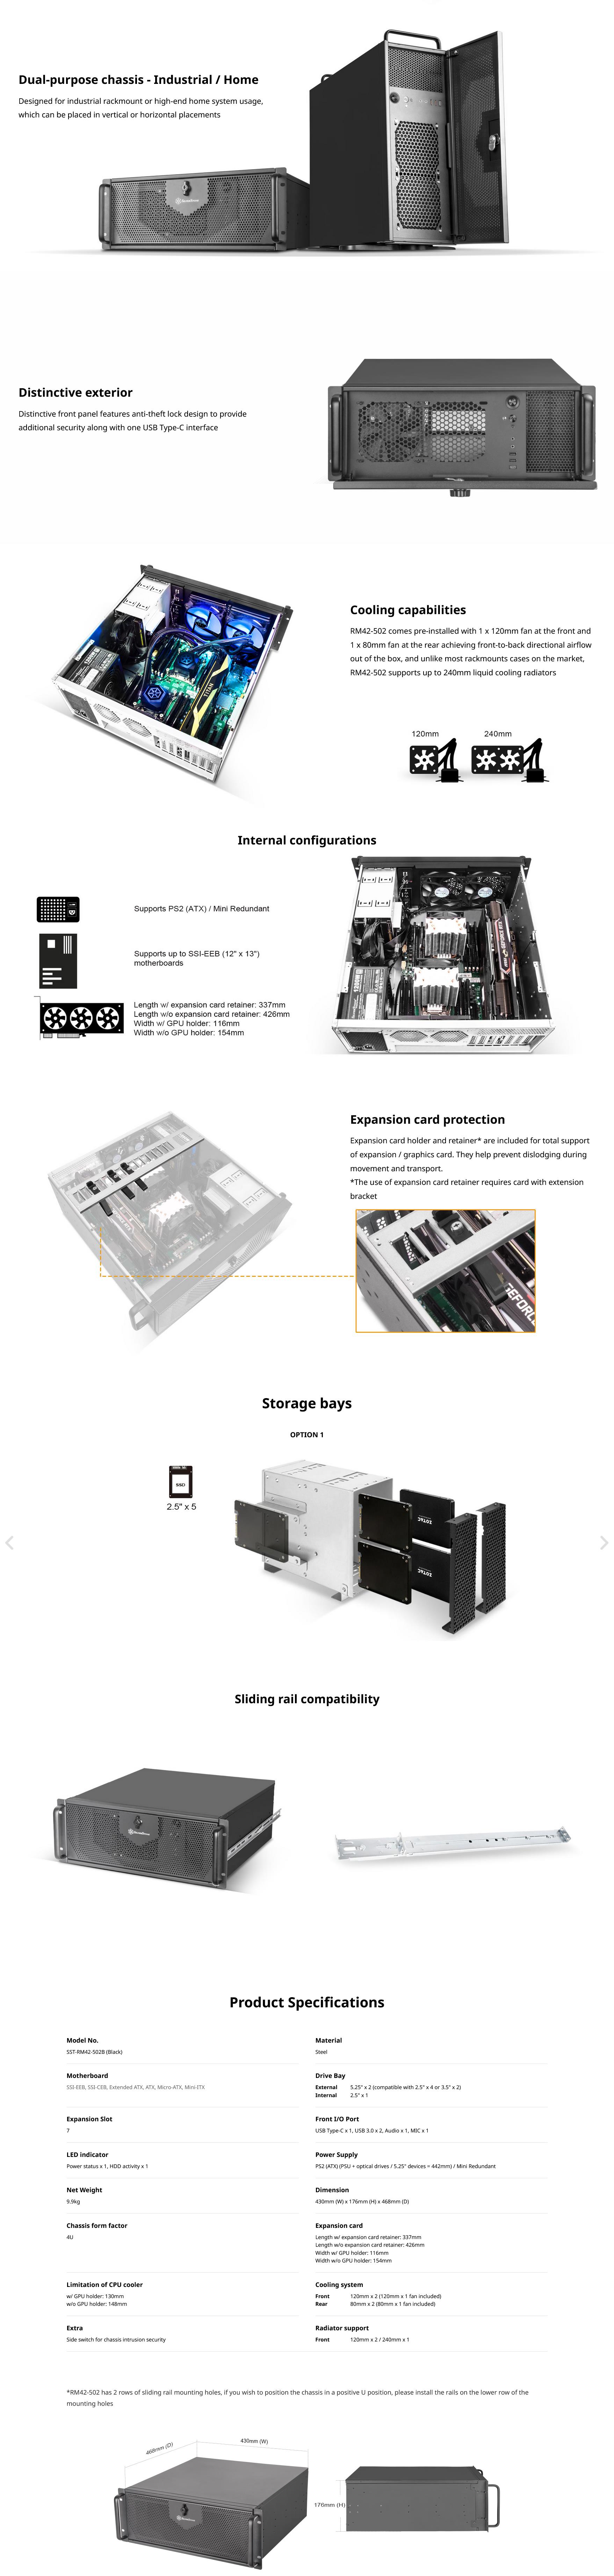 A large marketing image providing additional information about the product SilverStone RM42-502 4U Rackmount Case - Black - Additional alt info not provided